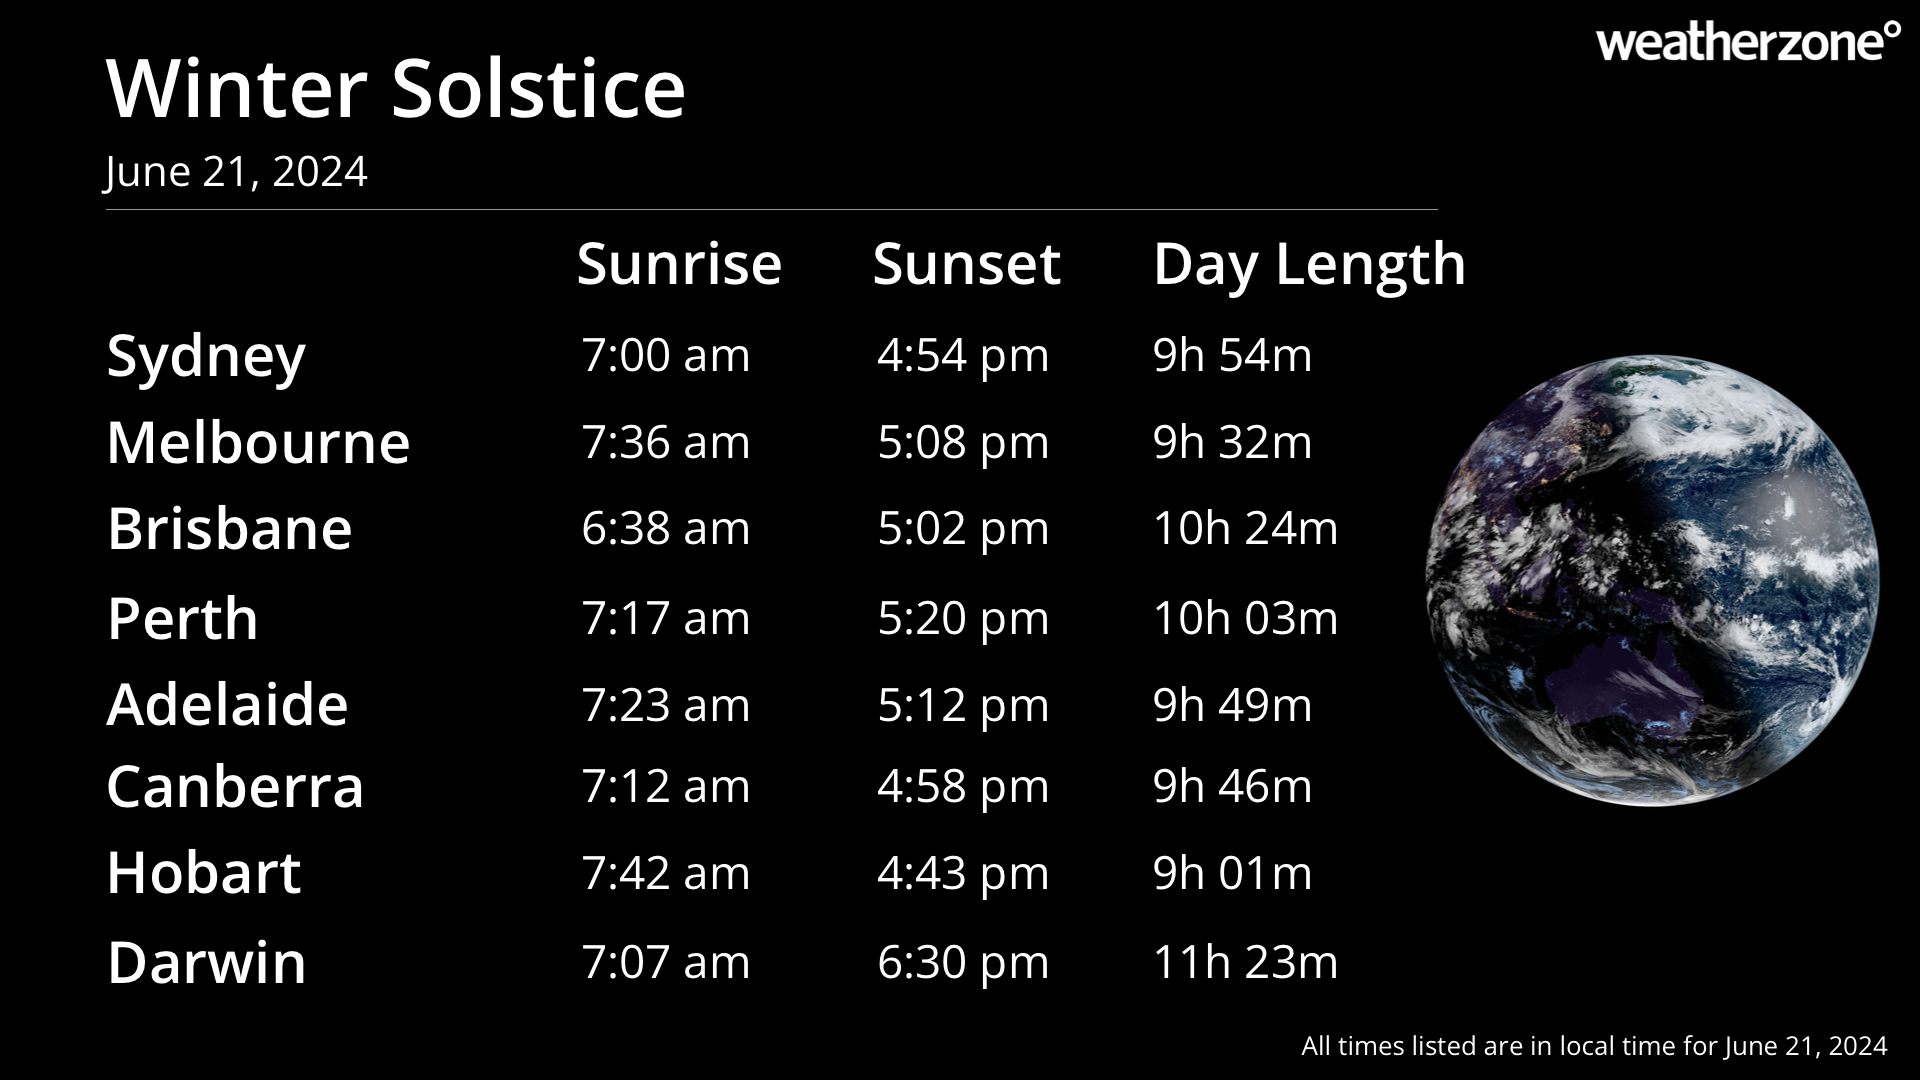 Sunrise, sunset and day length times for Australia's capital cities on the 202 winter solstice.